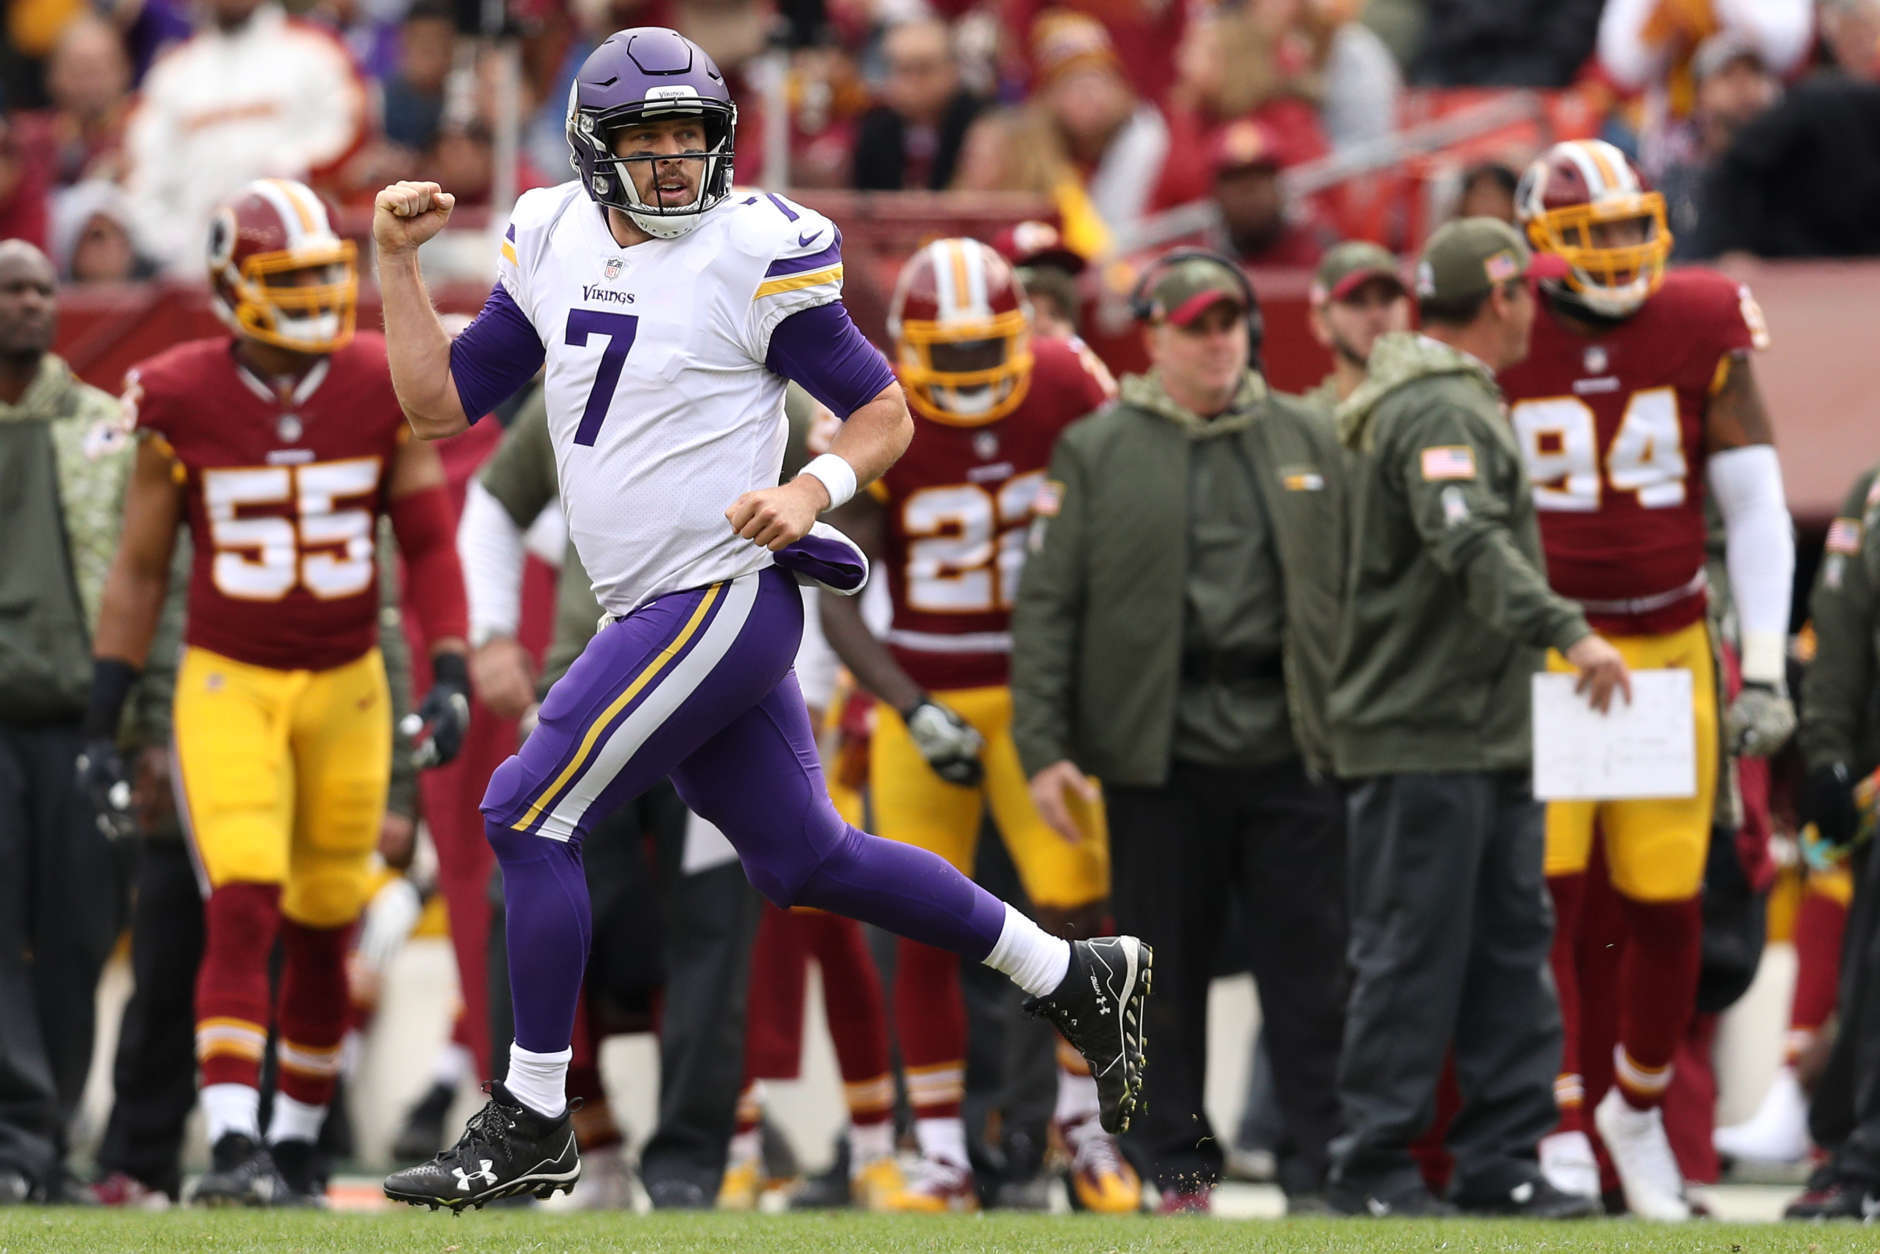 LANDOVER, MD - NOVEMBER 12: Quarterback Case Keenum #7 of the Minnesota Vikings celebrates after throwing a touchdown during the second quarter against the Washington Redskins at FedExField on November 12, 2017 in Landover, Maryland. (Photo by Patrick Smith/Getty Images)